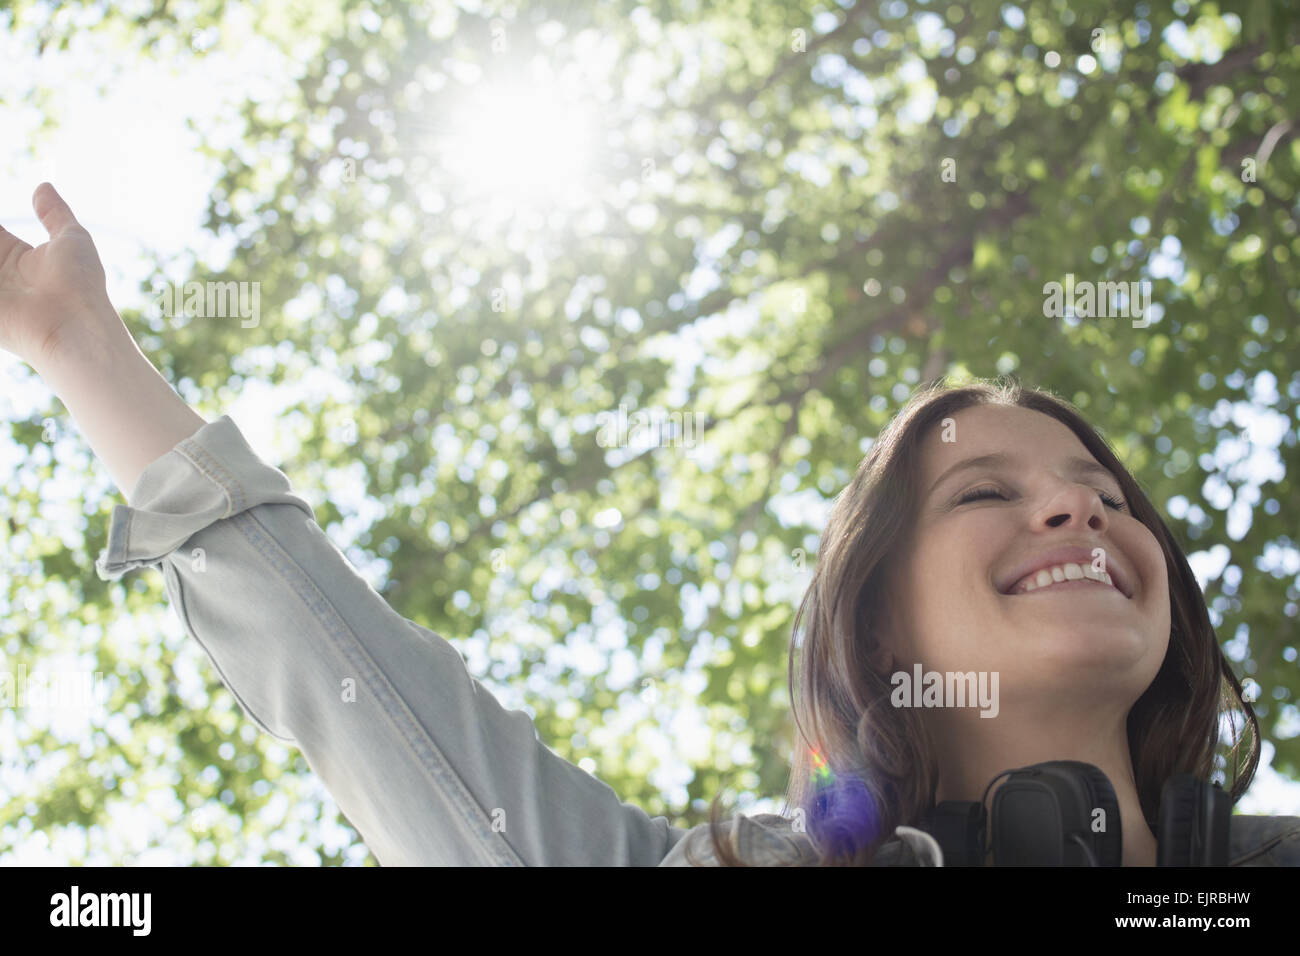 Low angle view of Caucasian woman cheering outdoors Banque D'Images